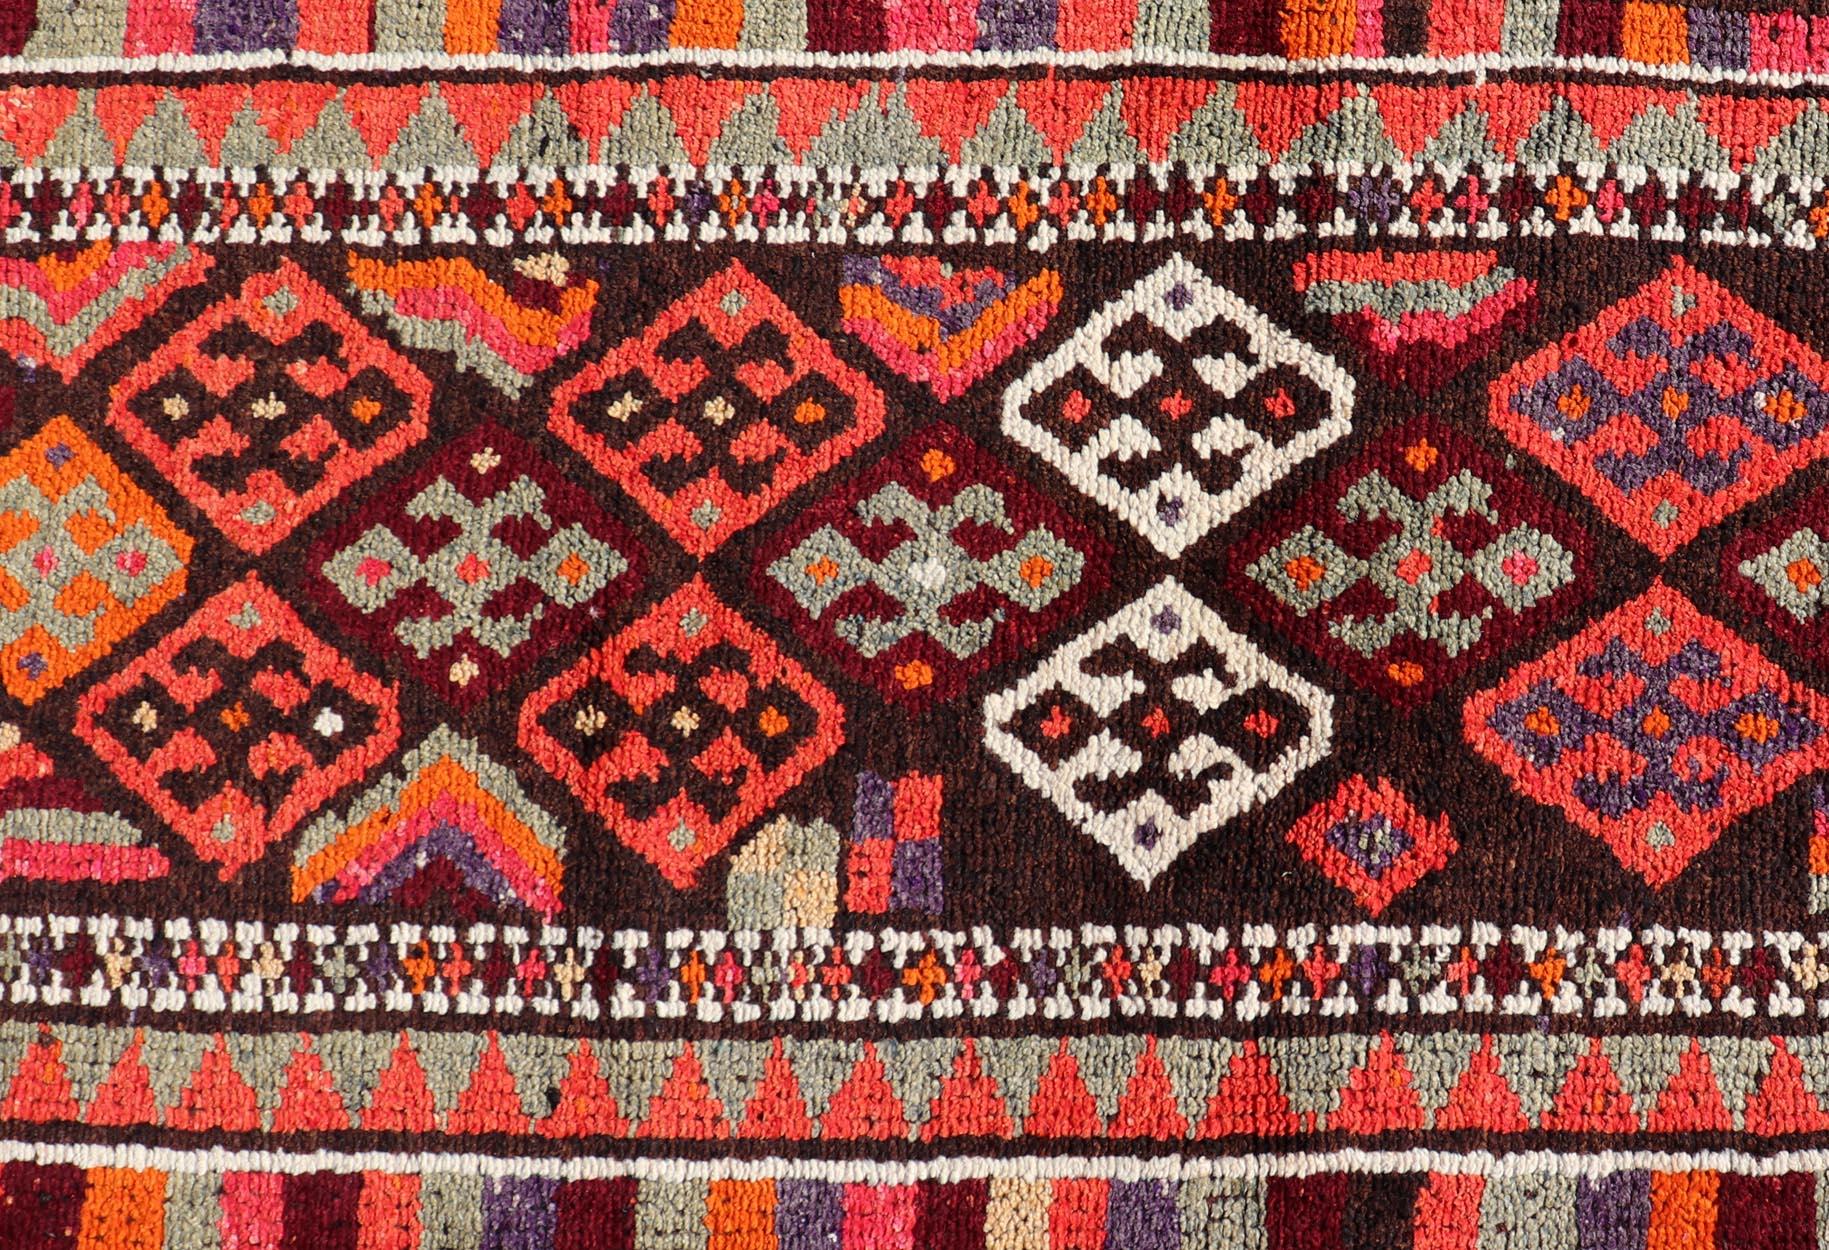 Measures: 2'11 x 13'3 
Turkish Geometric Kurdish Design Vintage Runner With All-Over Tribal Design. Keivan Woven Arts / rug TU-NED-5028, country of origin / type: Turkey / Turkish 1960's.
This runner from Turkey features an all over diamond design,